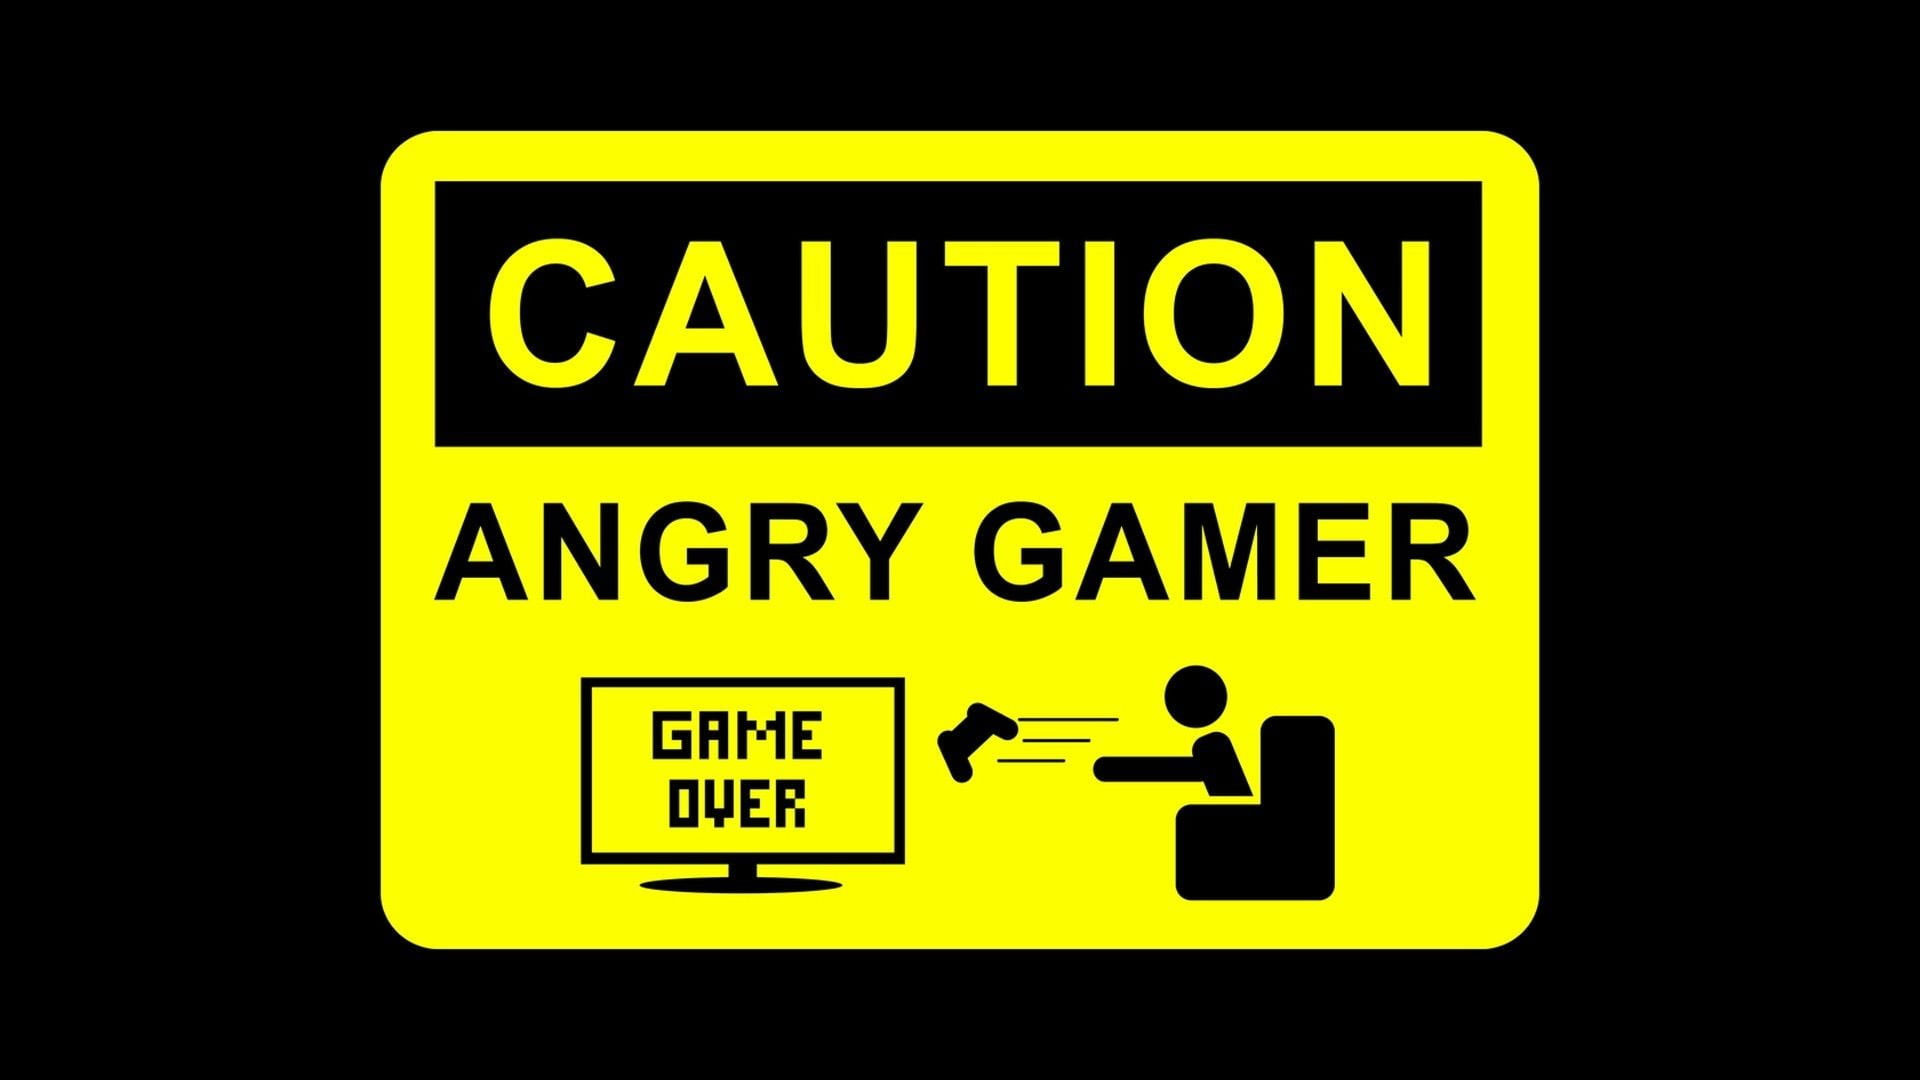 Caution Angry Gamer signage wallpaper, quote